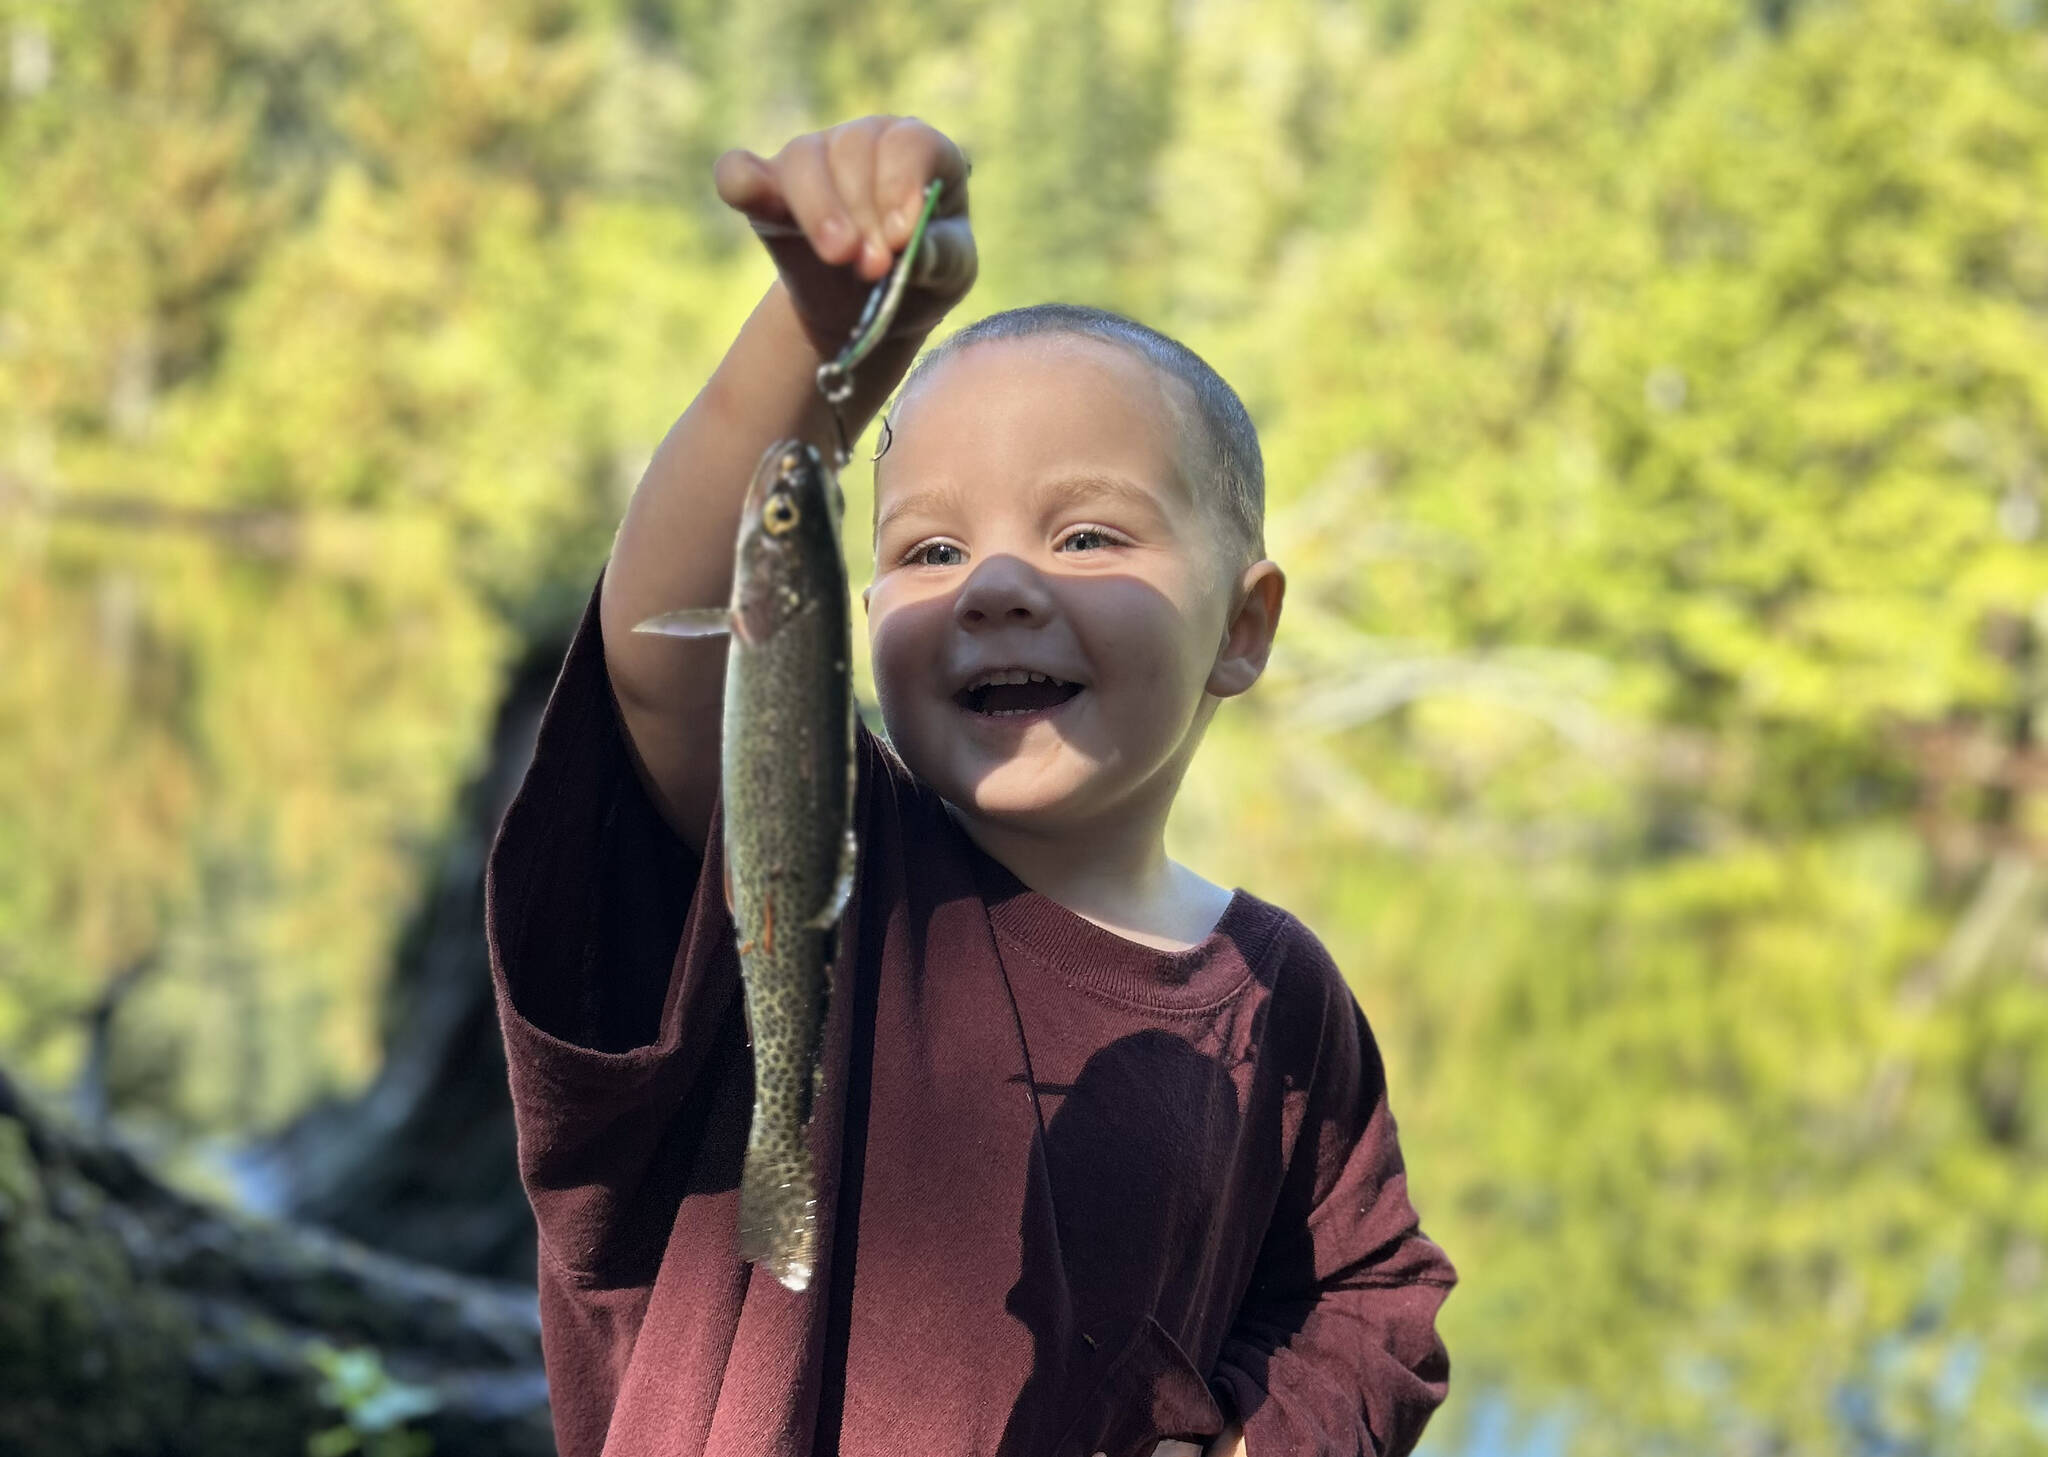 Sterling Hamilton, a little boy from Elma who survived heart surgery at 14 months, is getting bigger by the day. He caught his first rainbow trout recently, according to his dad, Anthony Hamilton. Hamilton couldn't have sounded any happier about his eldest son's development. "He has been doing a great job with making friends," Anthony said. "He can go anywhere and get along with other kids of all ages, and make friends." (Provided photo)